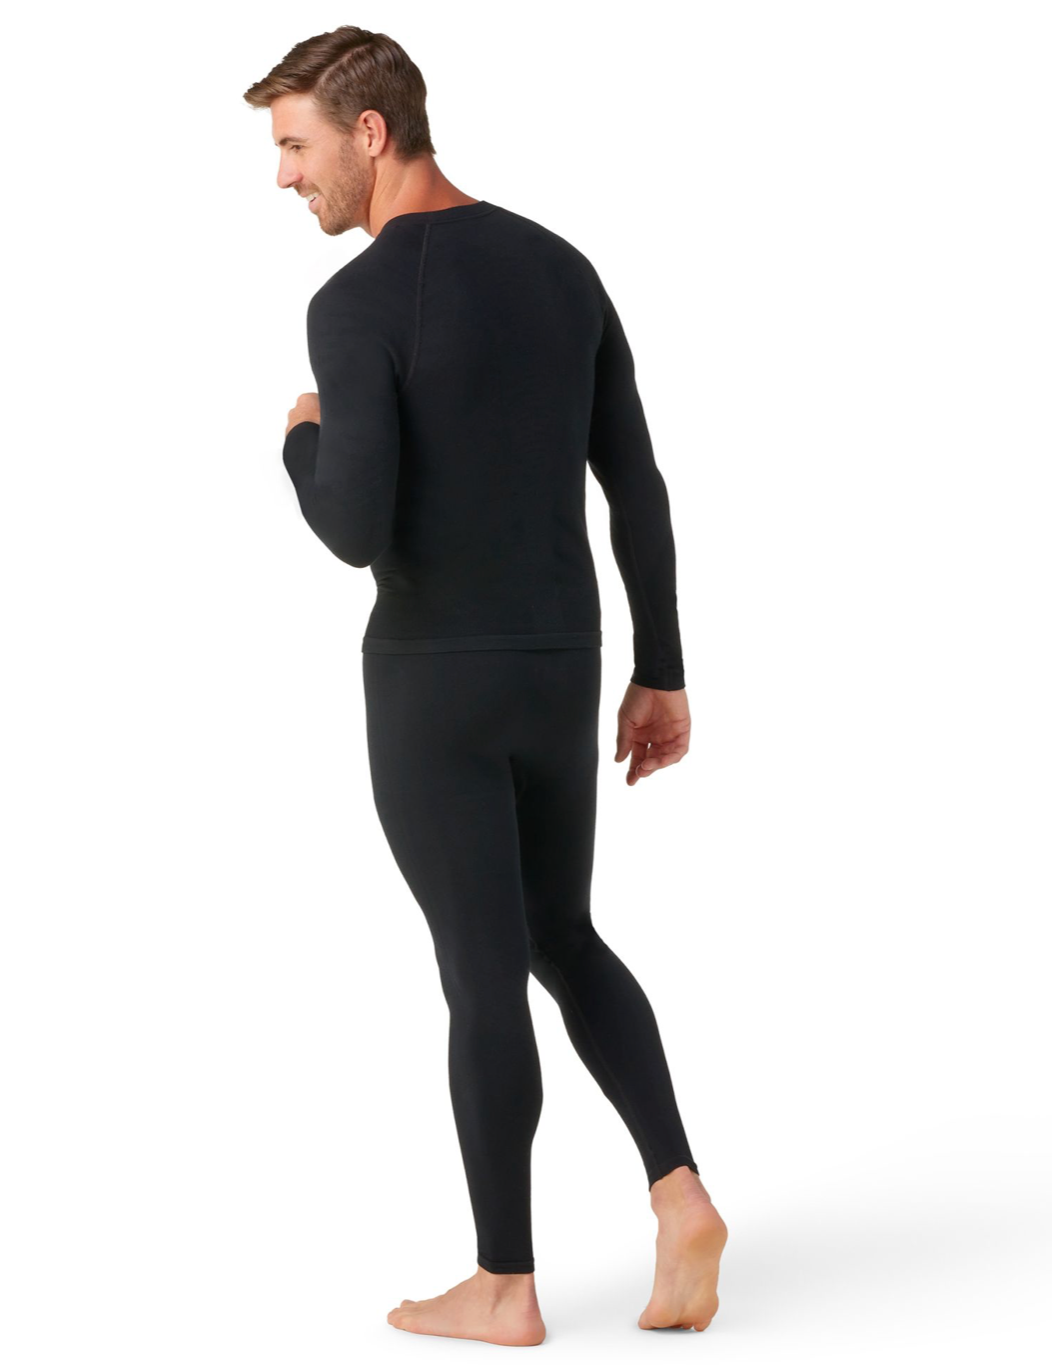 Intraknit Active Base Layer Long Sleeve Ms